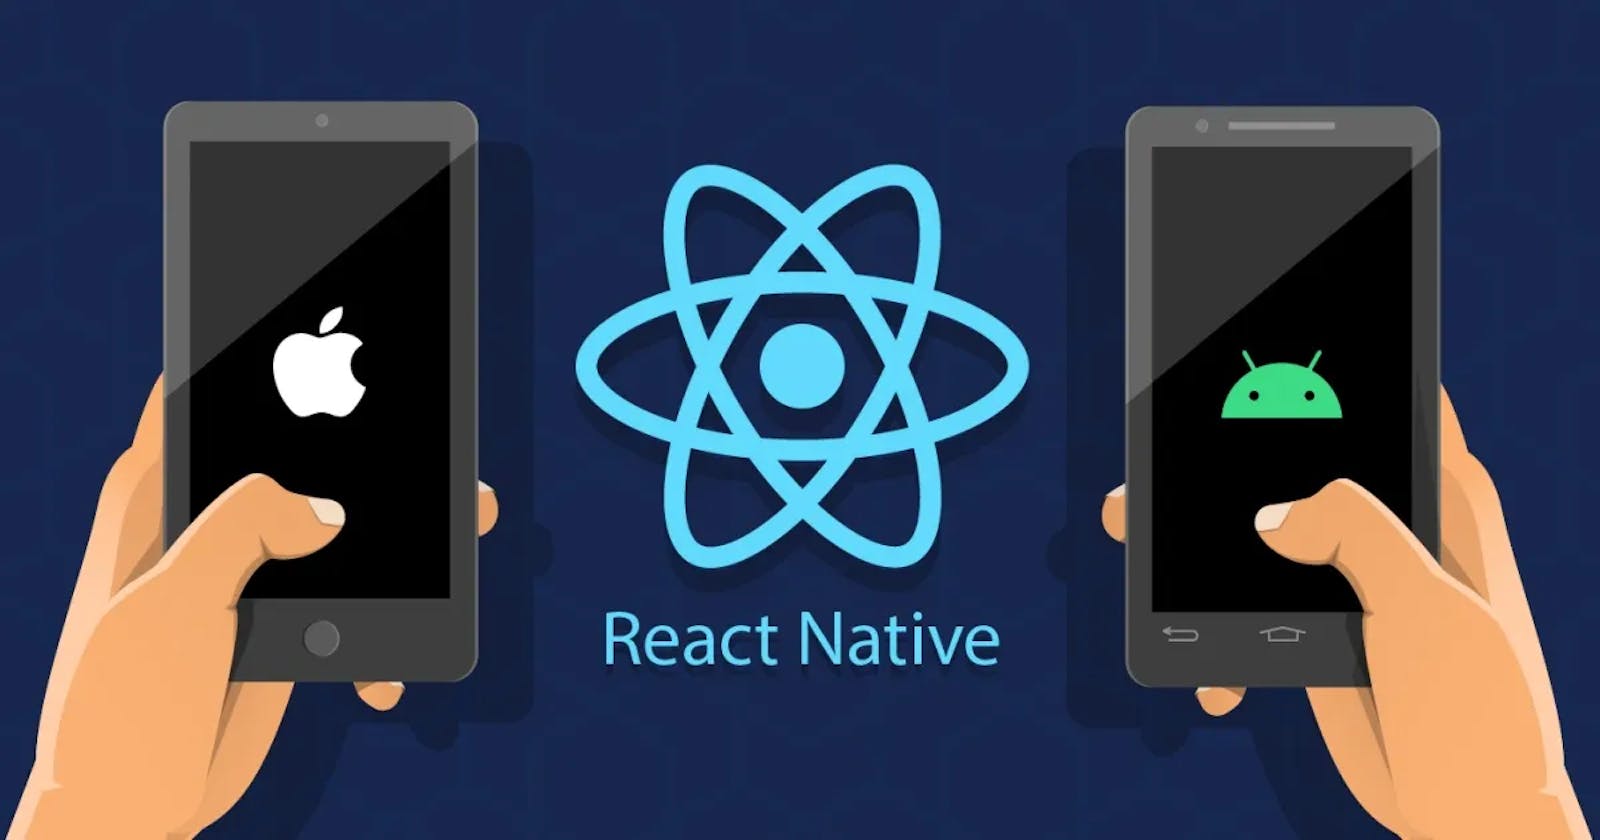 React Native Quick Environment setup and Installation guide for Windows